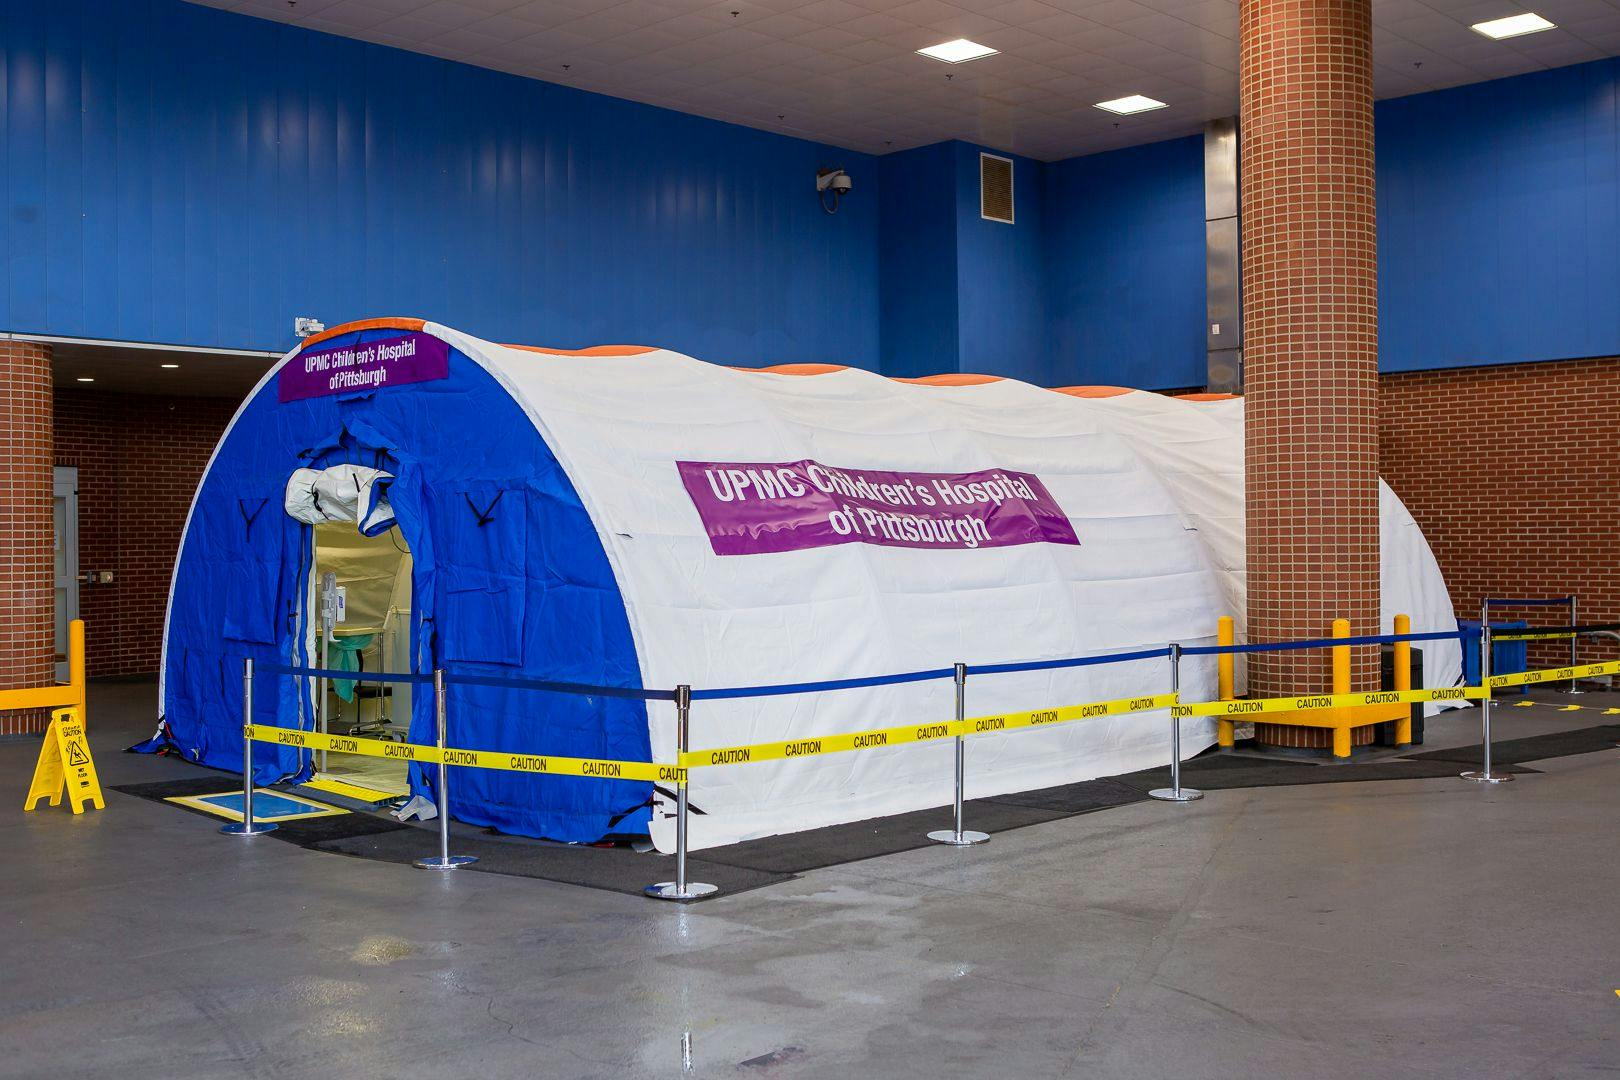 UPMC Children's Hospital of Pittsburgh has set up a tent to help deal with the high volume of patients. (Photo: UPMC)